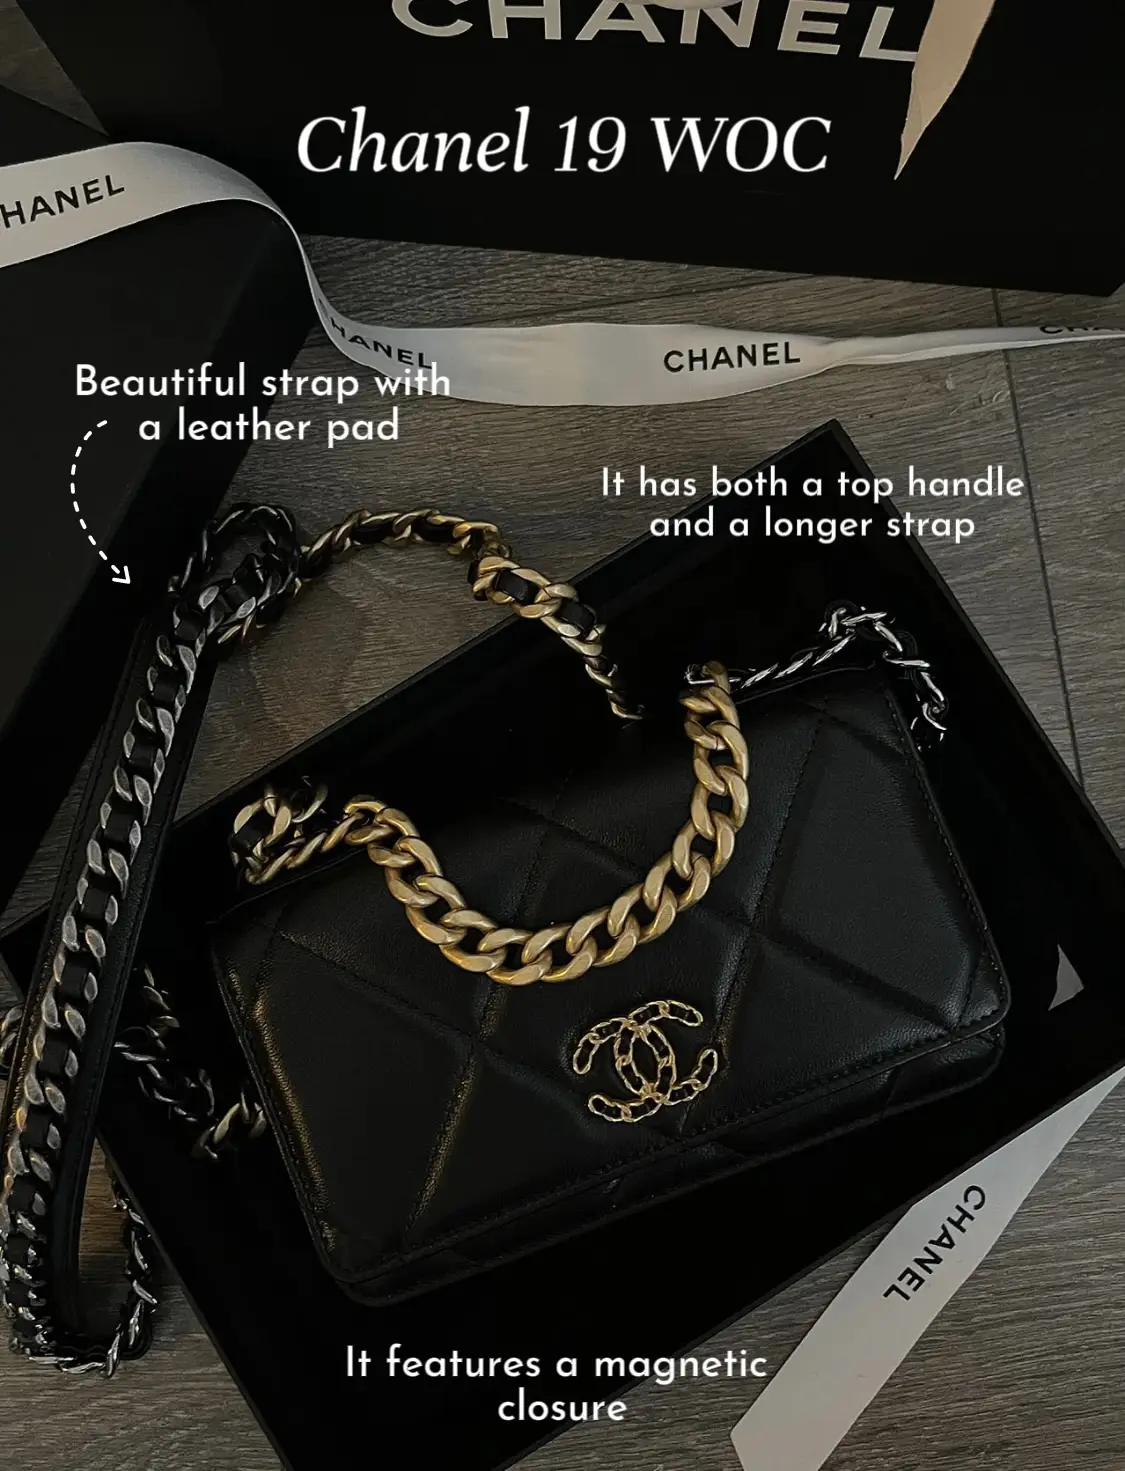 Adorable Mini Bag from Chanel, Gallery posted by Elliah Zoie